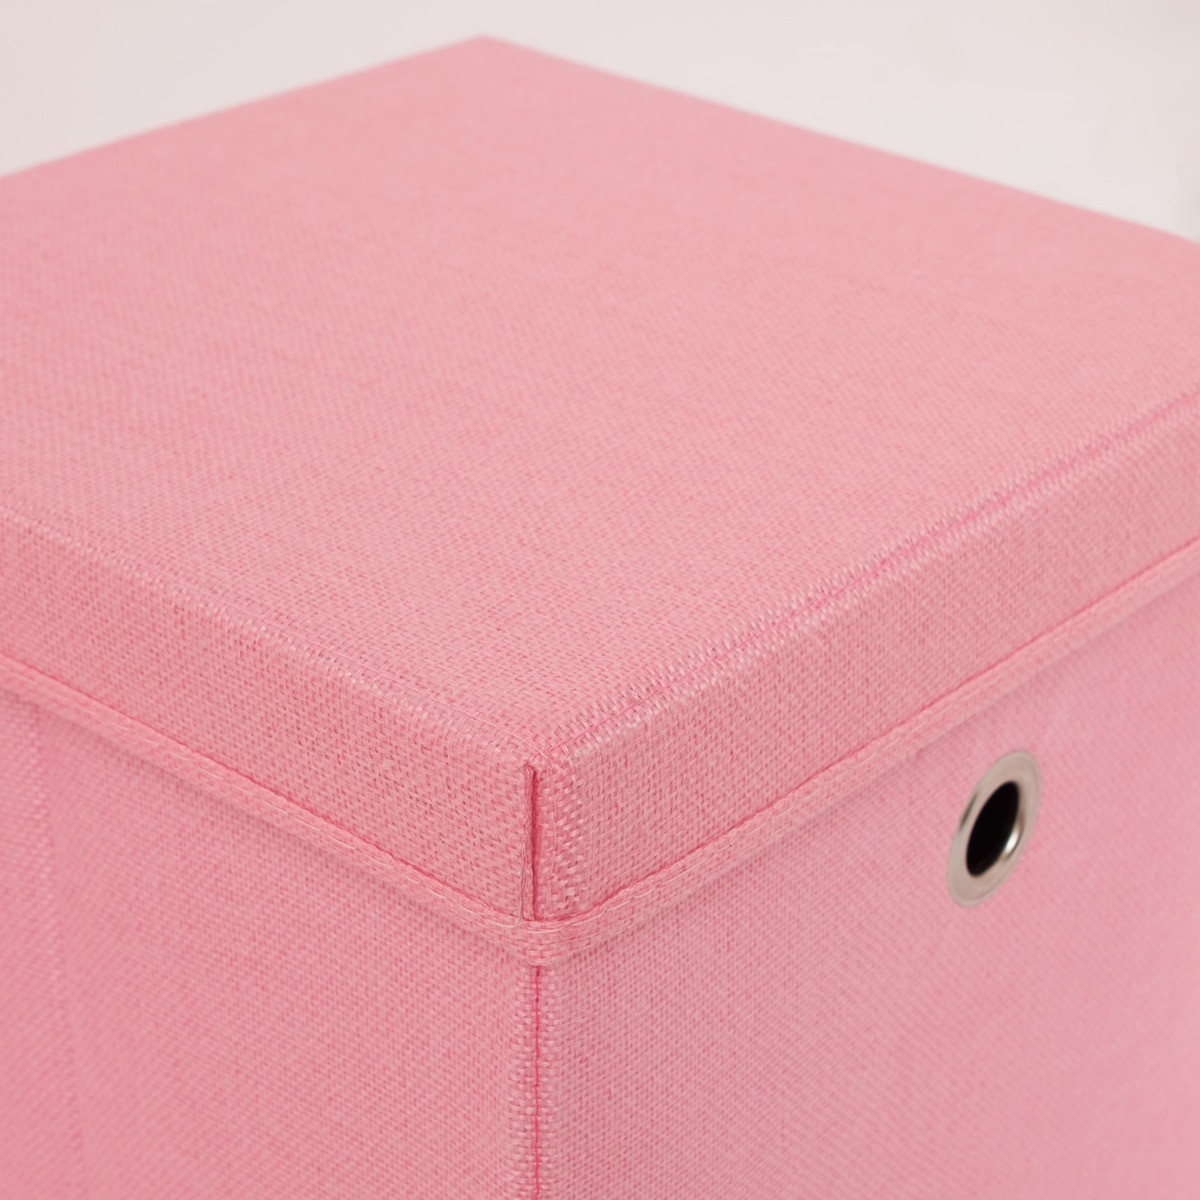 OHS Faux Linen Storage Box With Lid, Blush - 2 Pack>